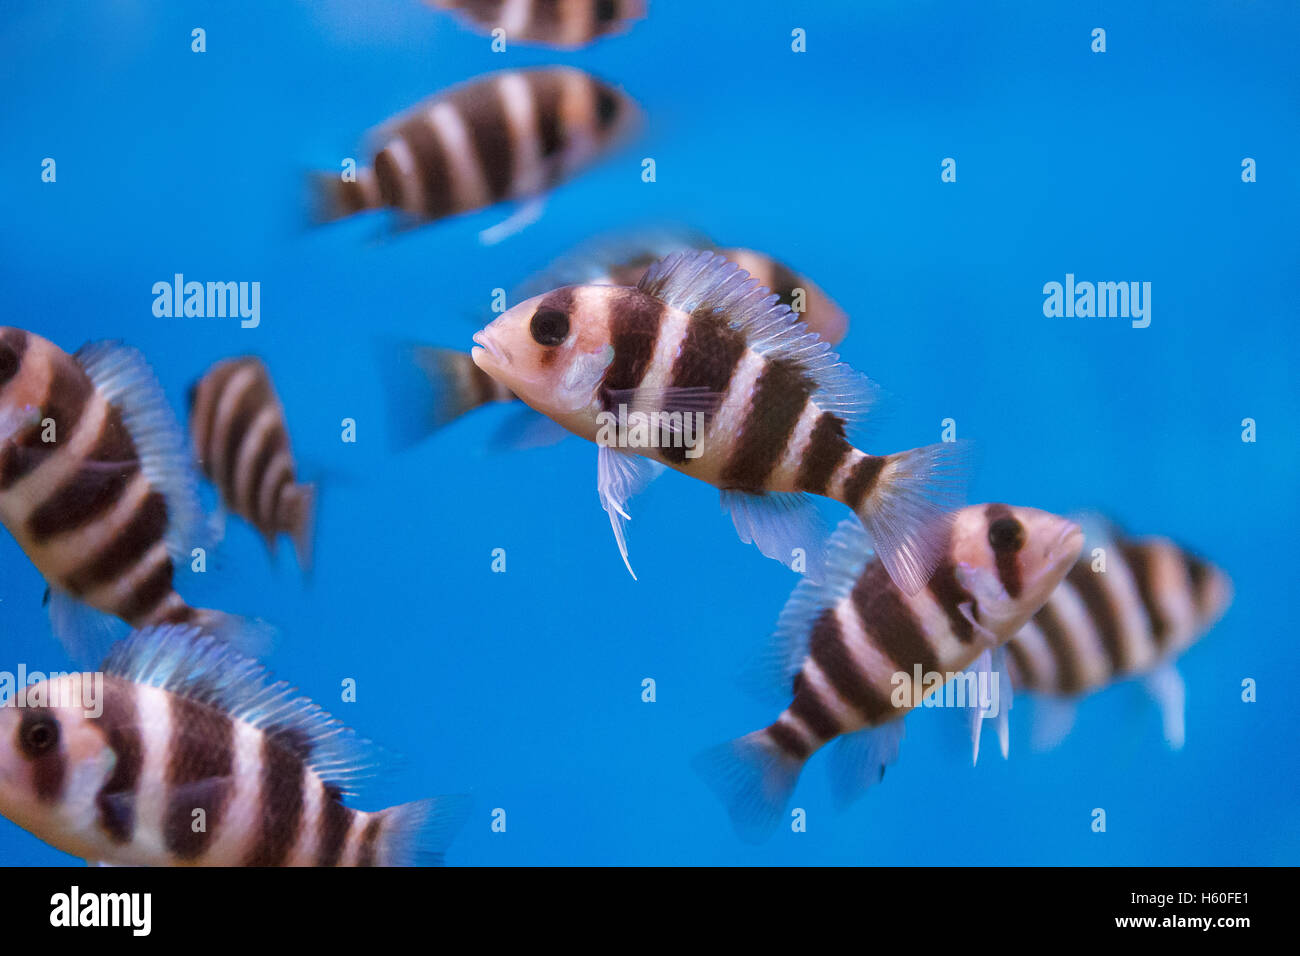 Several frontosa cyphotilapia fishes with stripes swimming in the aquarium Stock Photo